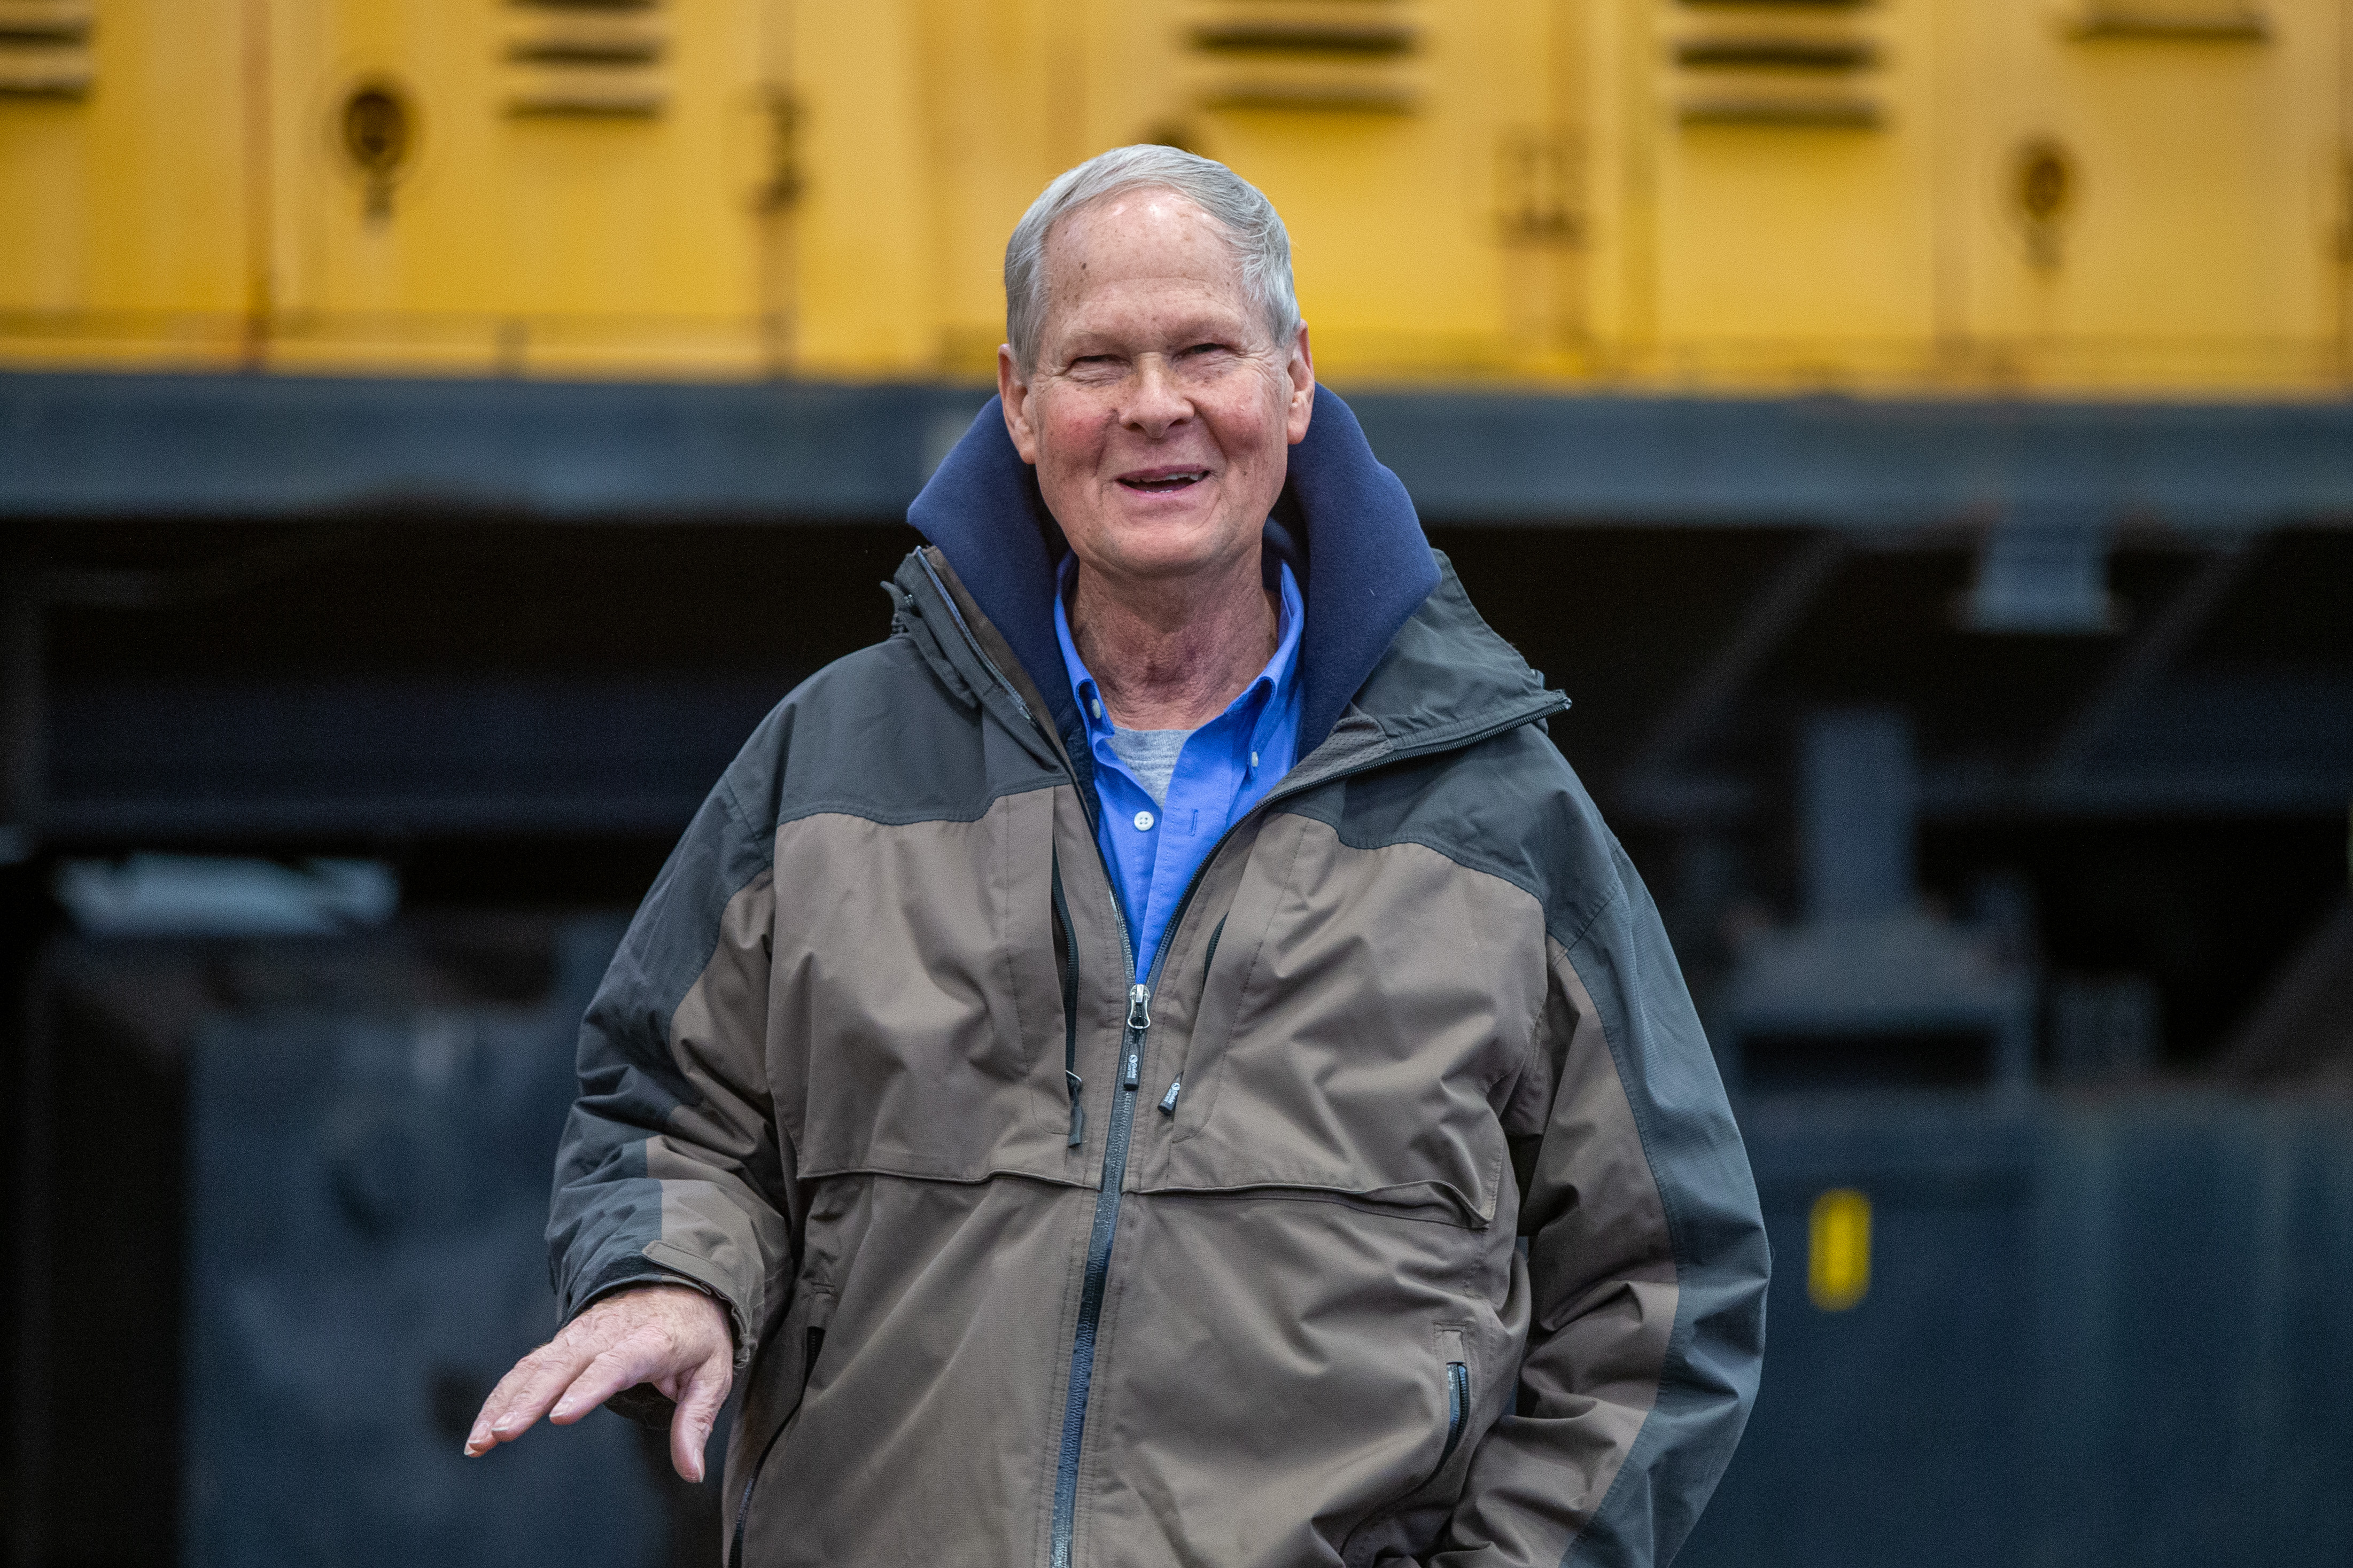 Jeff DuPilka, president of Coopersville and Marne Railway, speaks in front of a 1979 GE diesel train locomotive at the Consumers Energy J.H. Campbell plant in West Olive on Monday, Feb. 13, 2023. Consumers Energy is donating the locomotive to the railway. (Cory Morse | MLive.com)